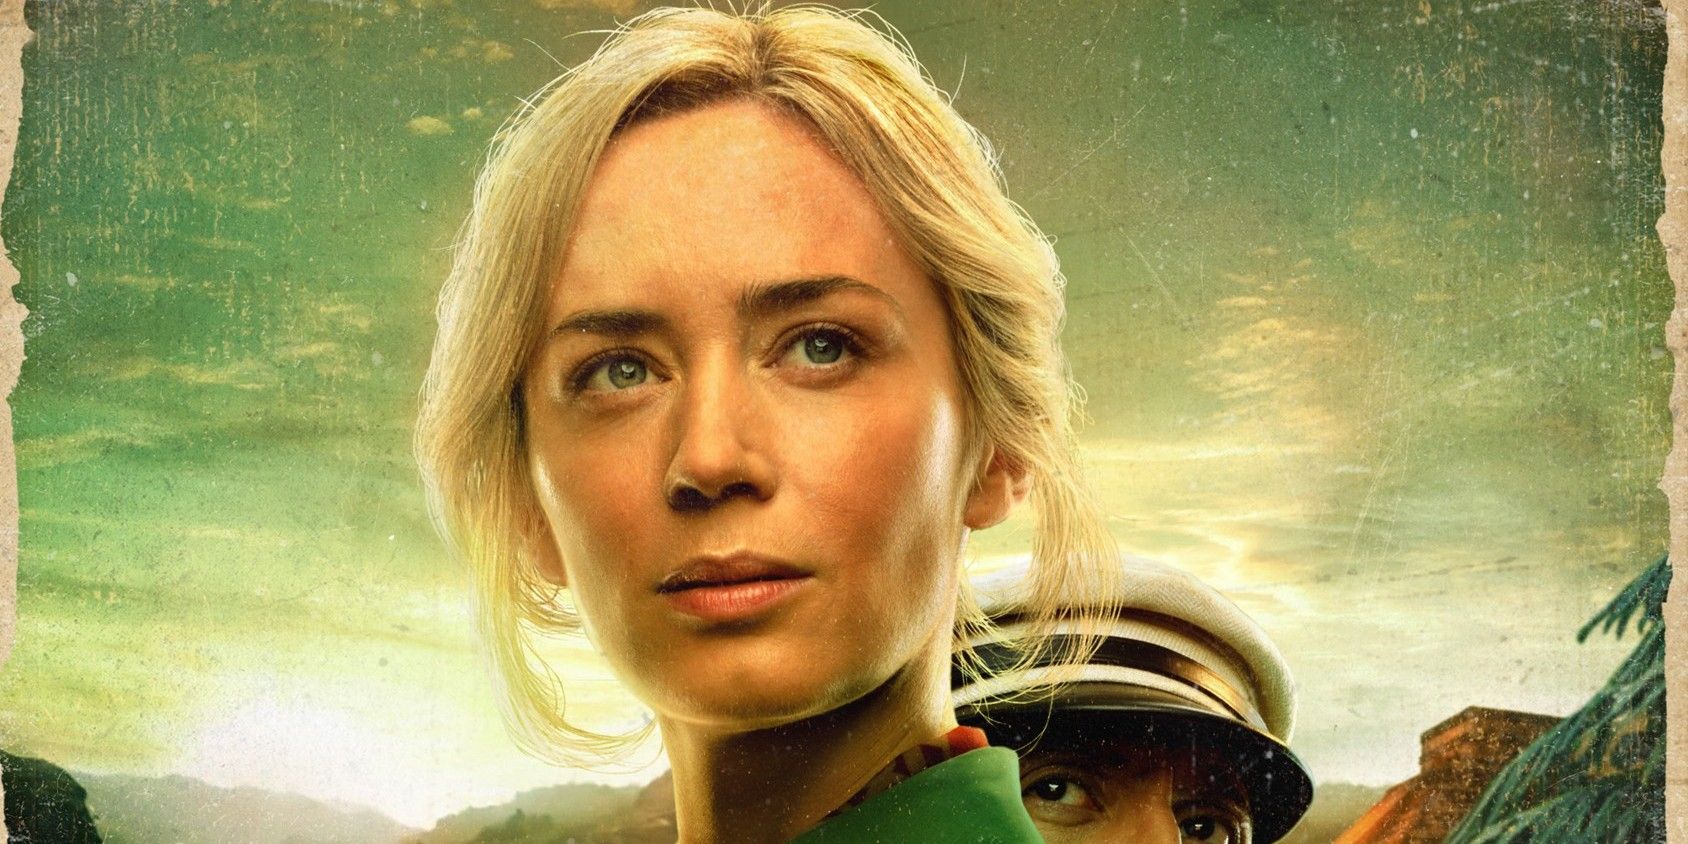 Jungle Cruise movie Emily Blunt poster